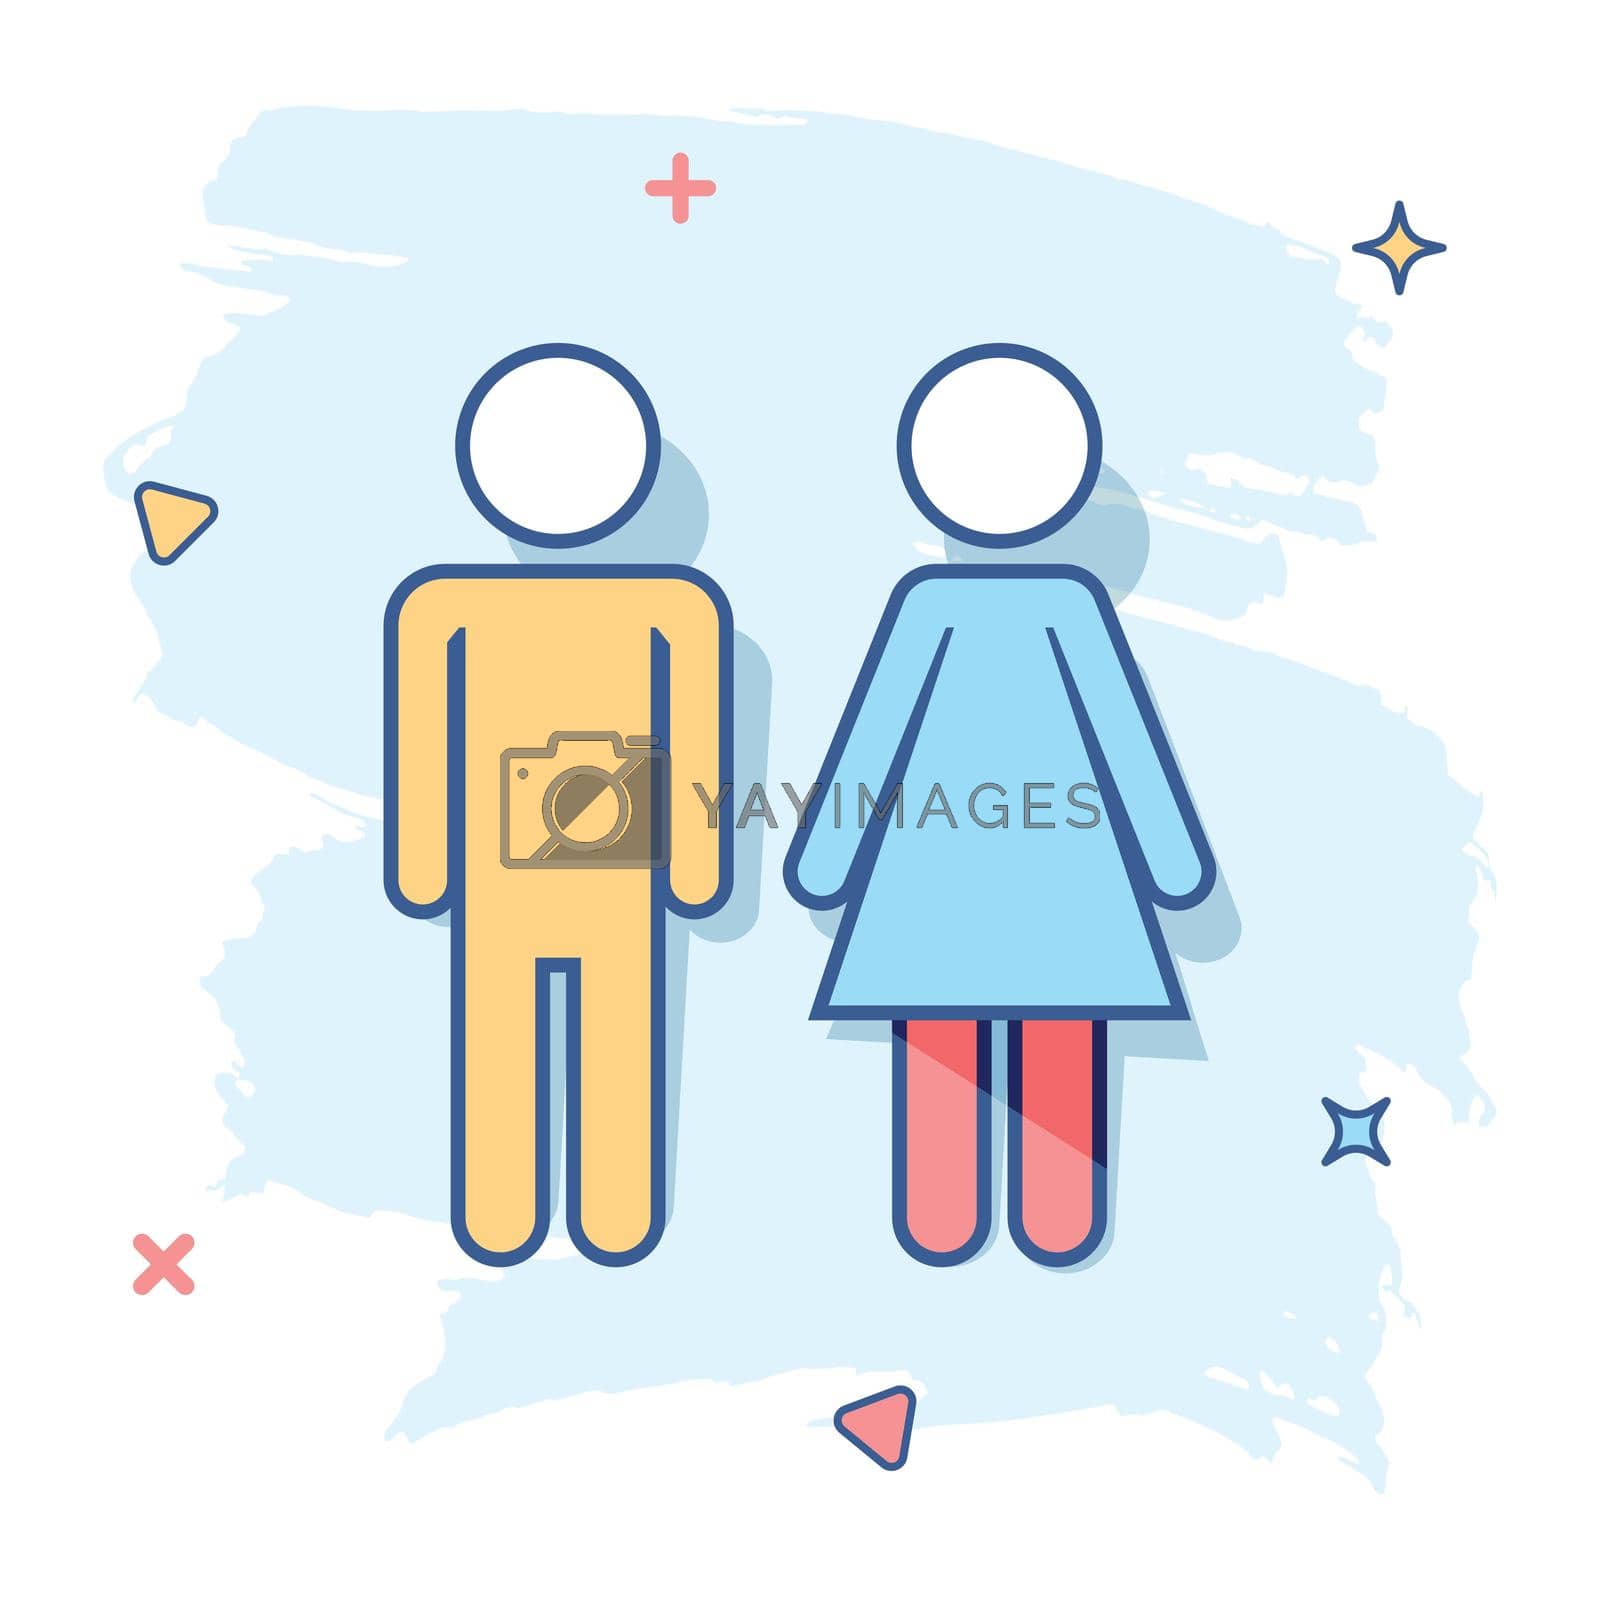 Royalty free image of Vector cartoon man and woman icon in comic style. WC sign illustration pictogram. Restroom business splash effect concept. by LysenkoA